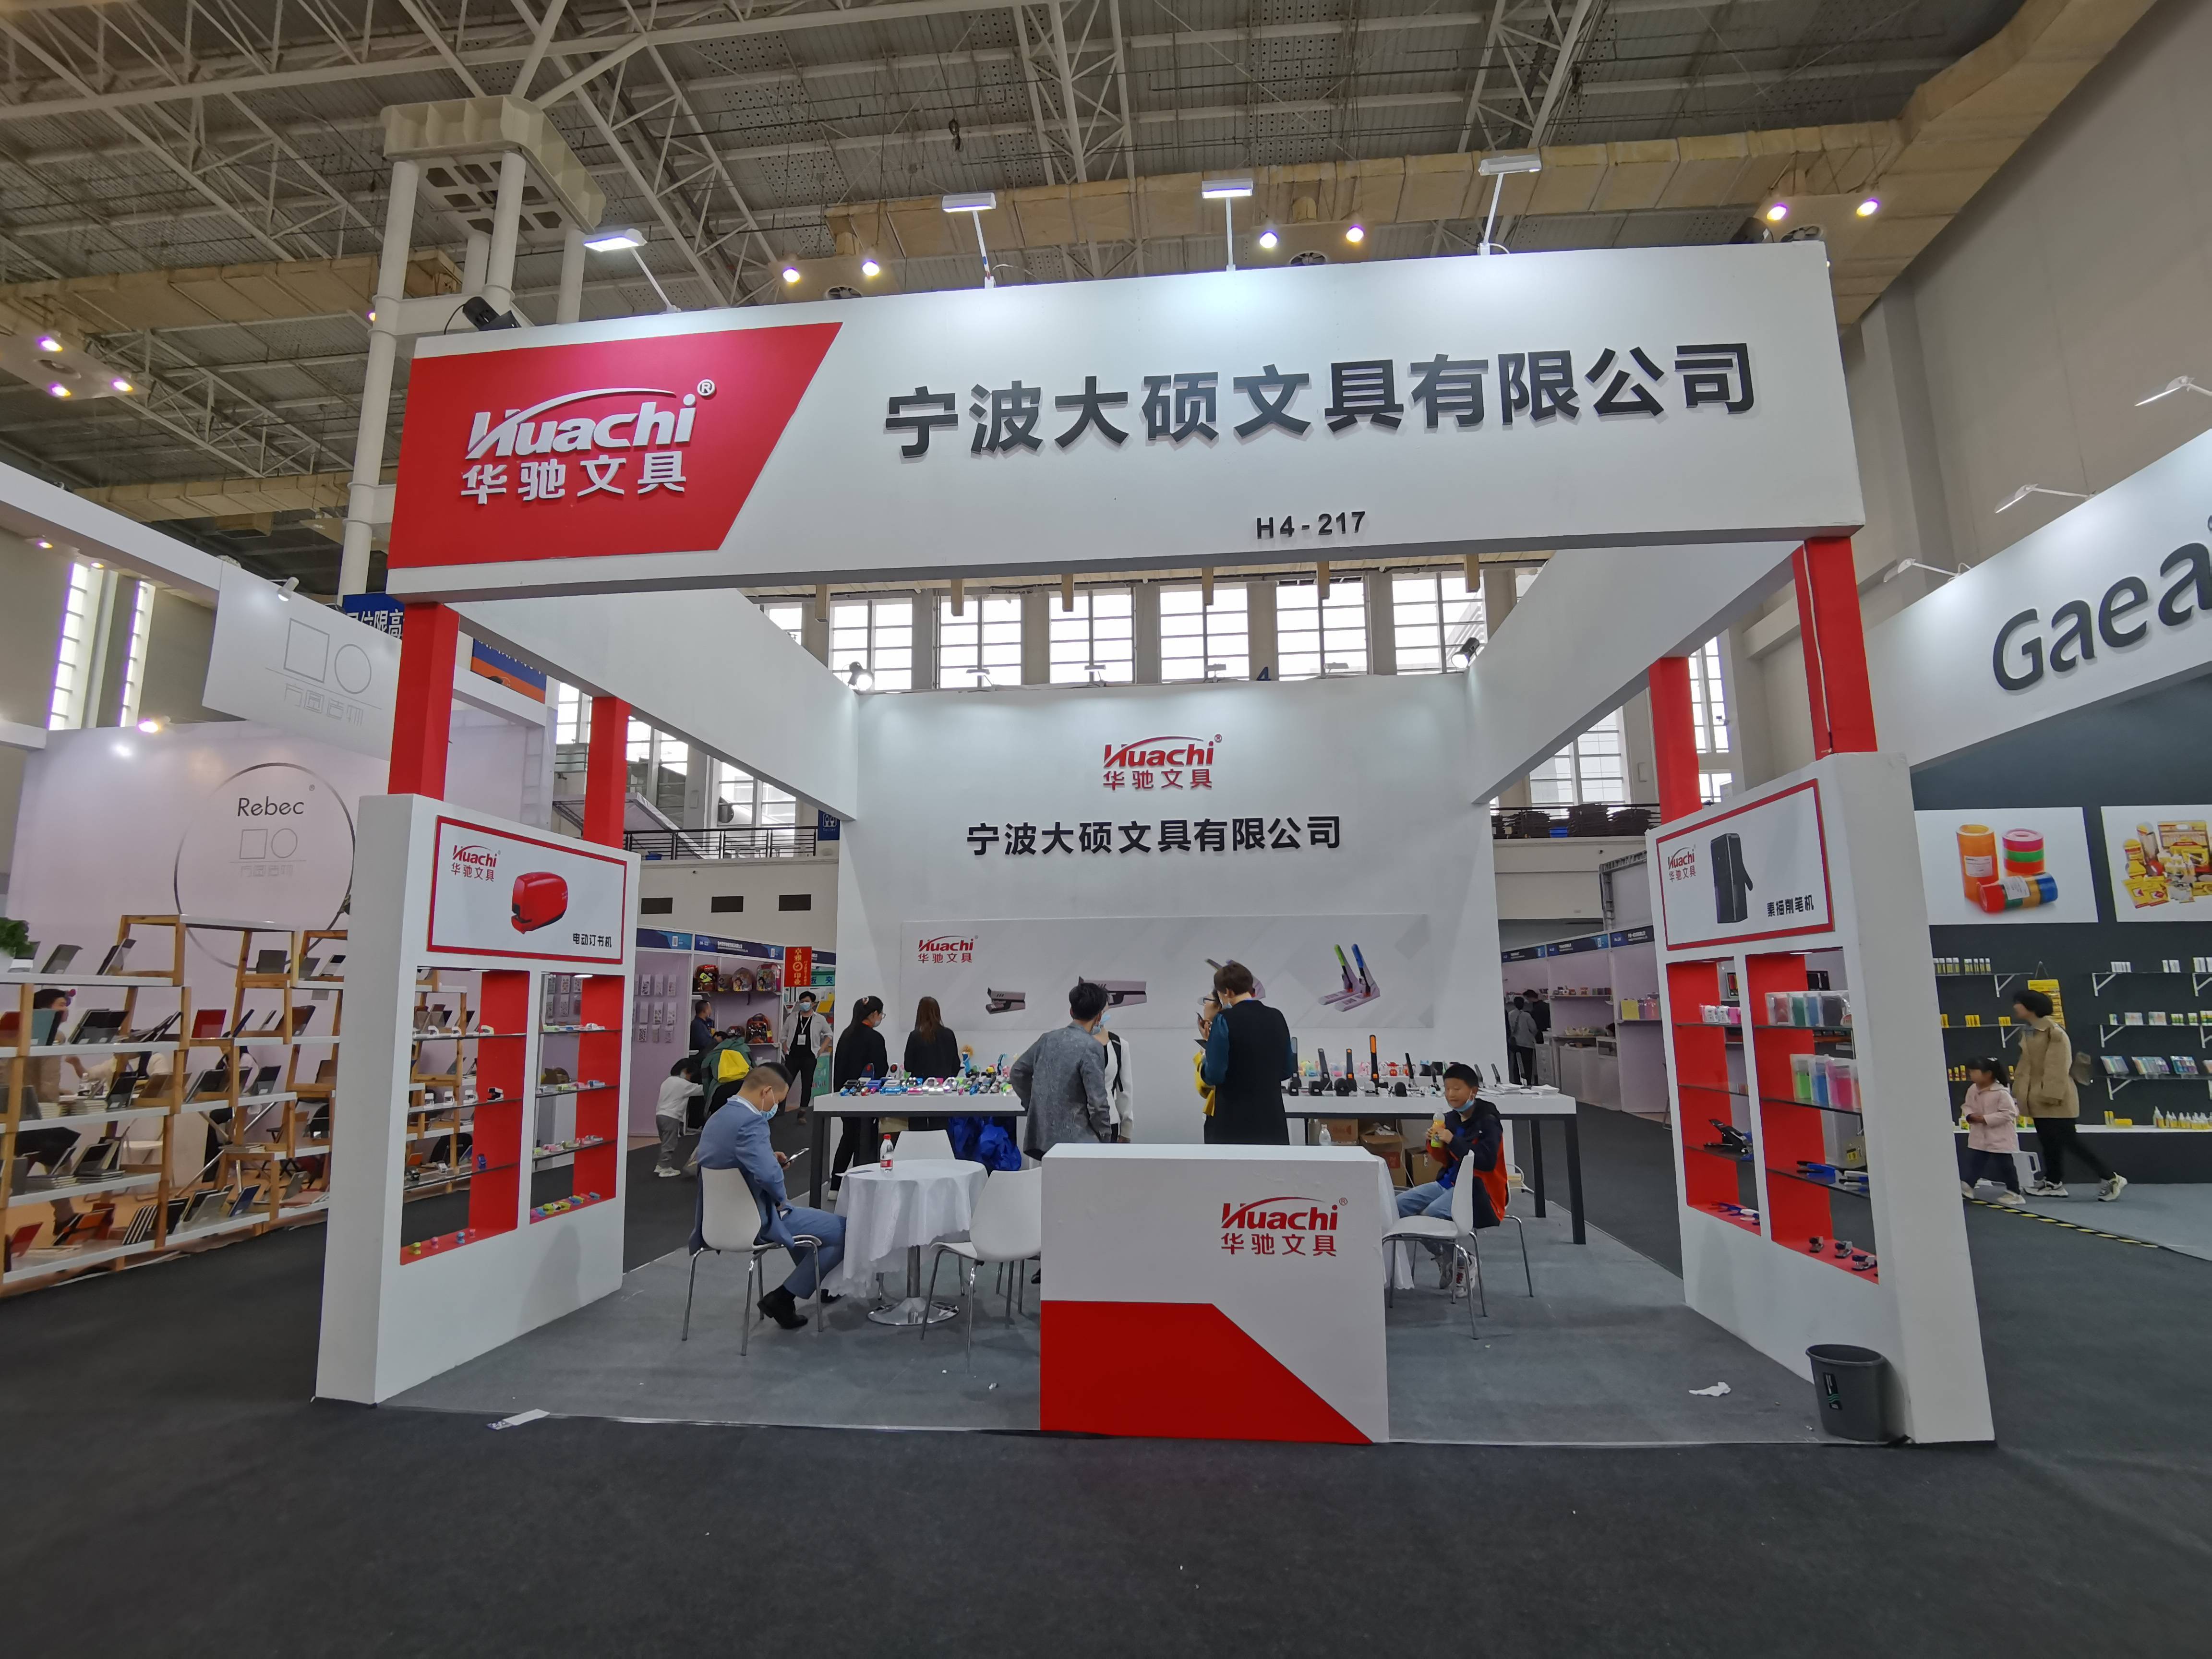 The 18th China International Stationery & Gifts Exposition